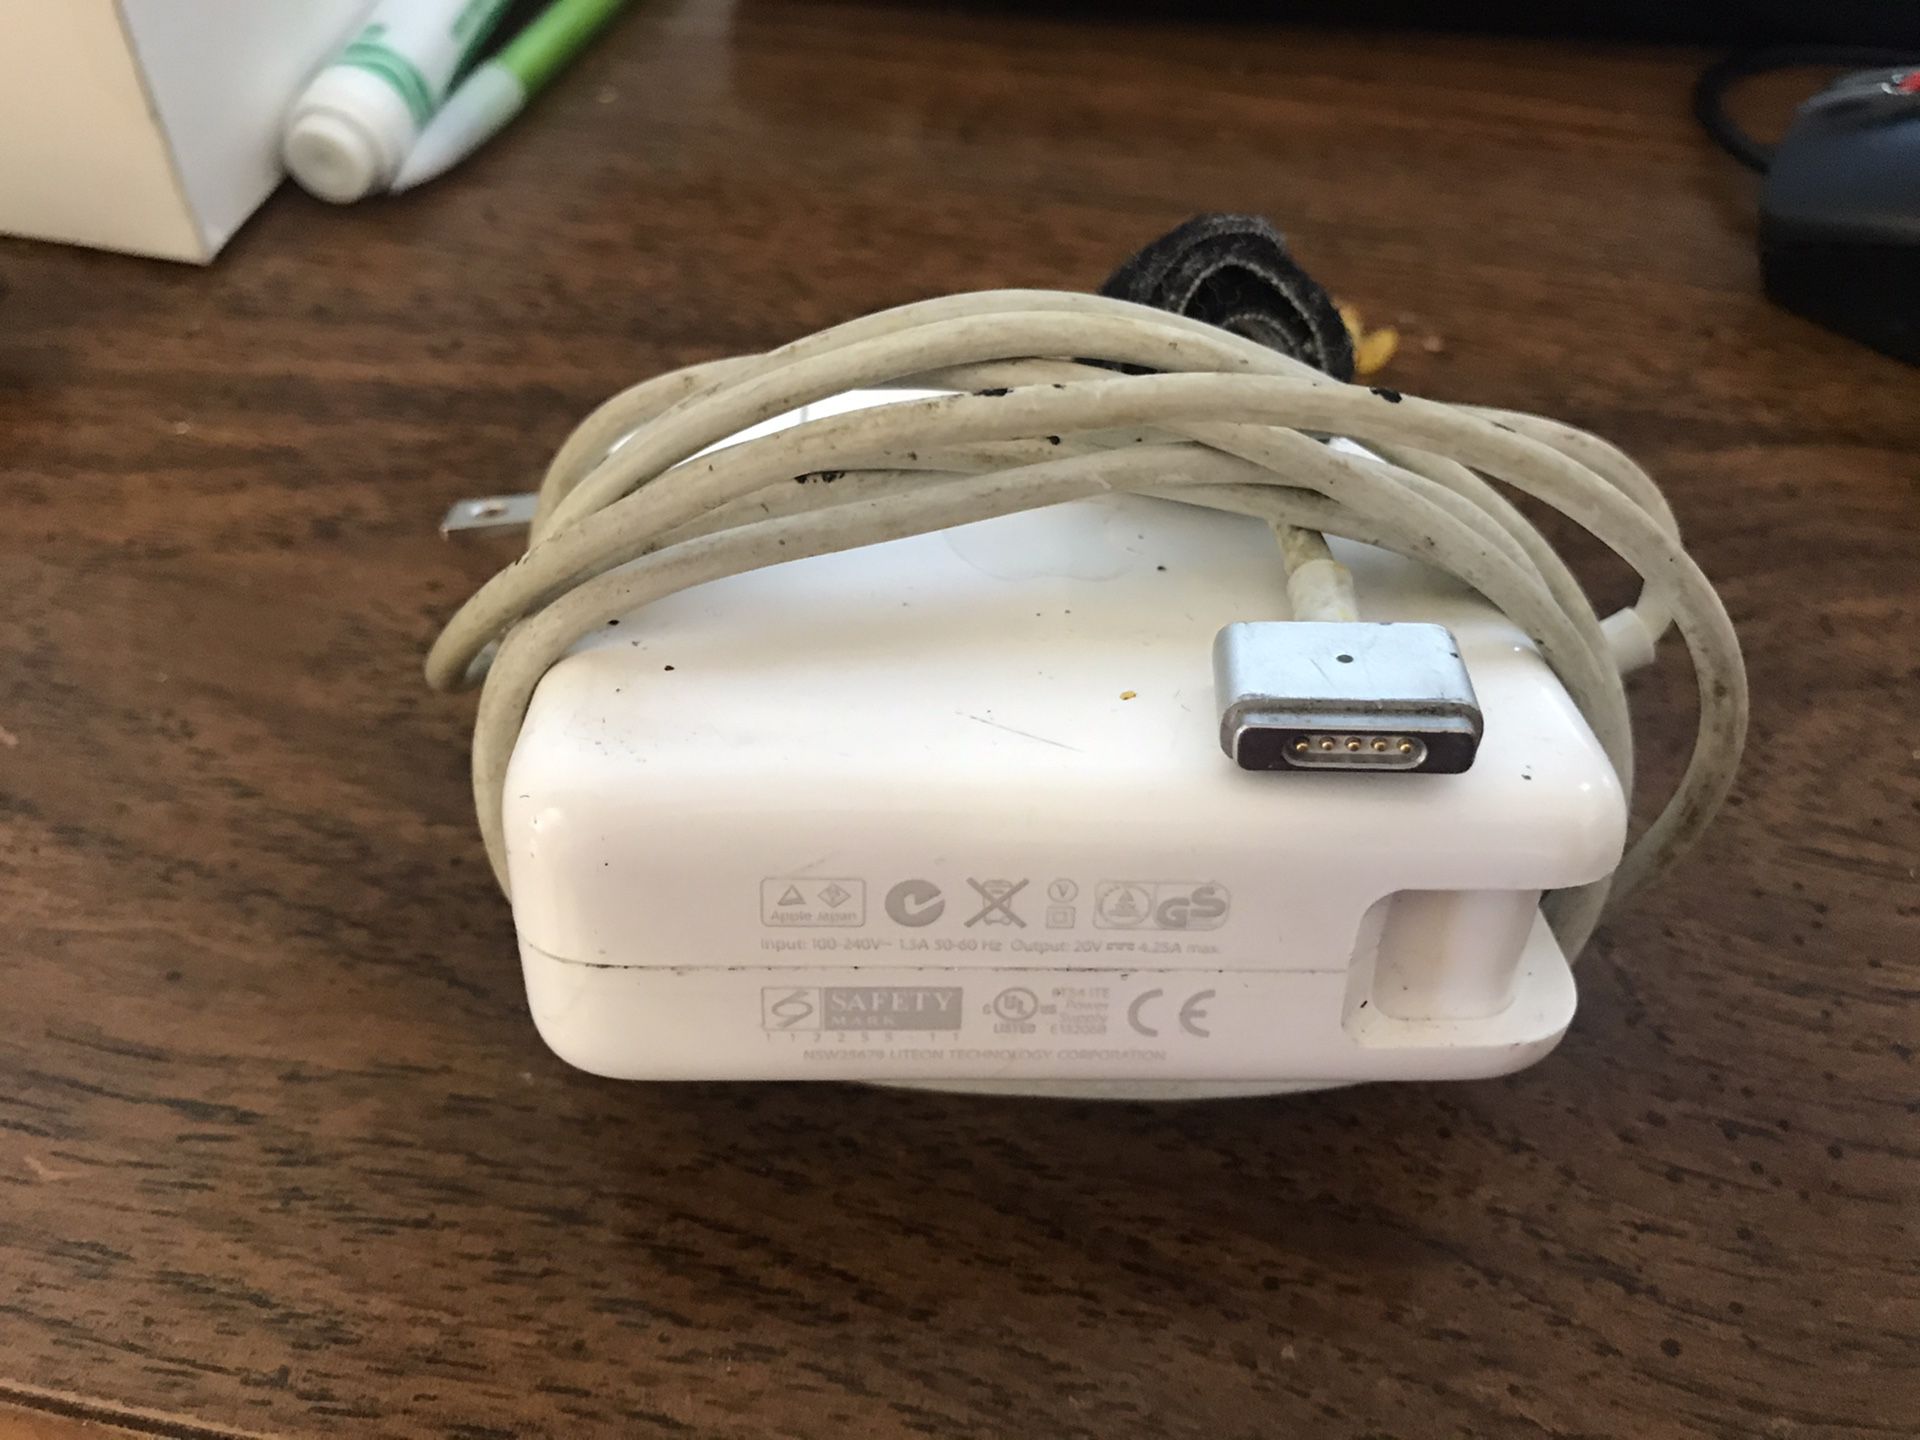 MacBook charger